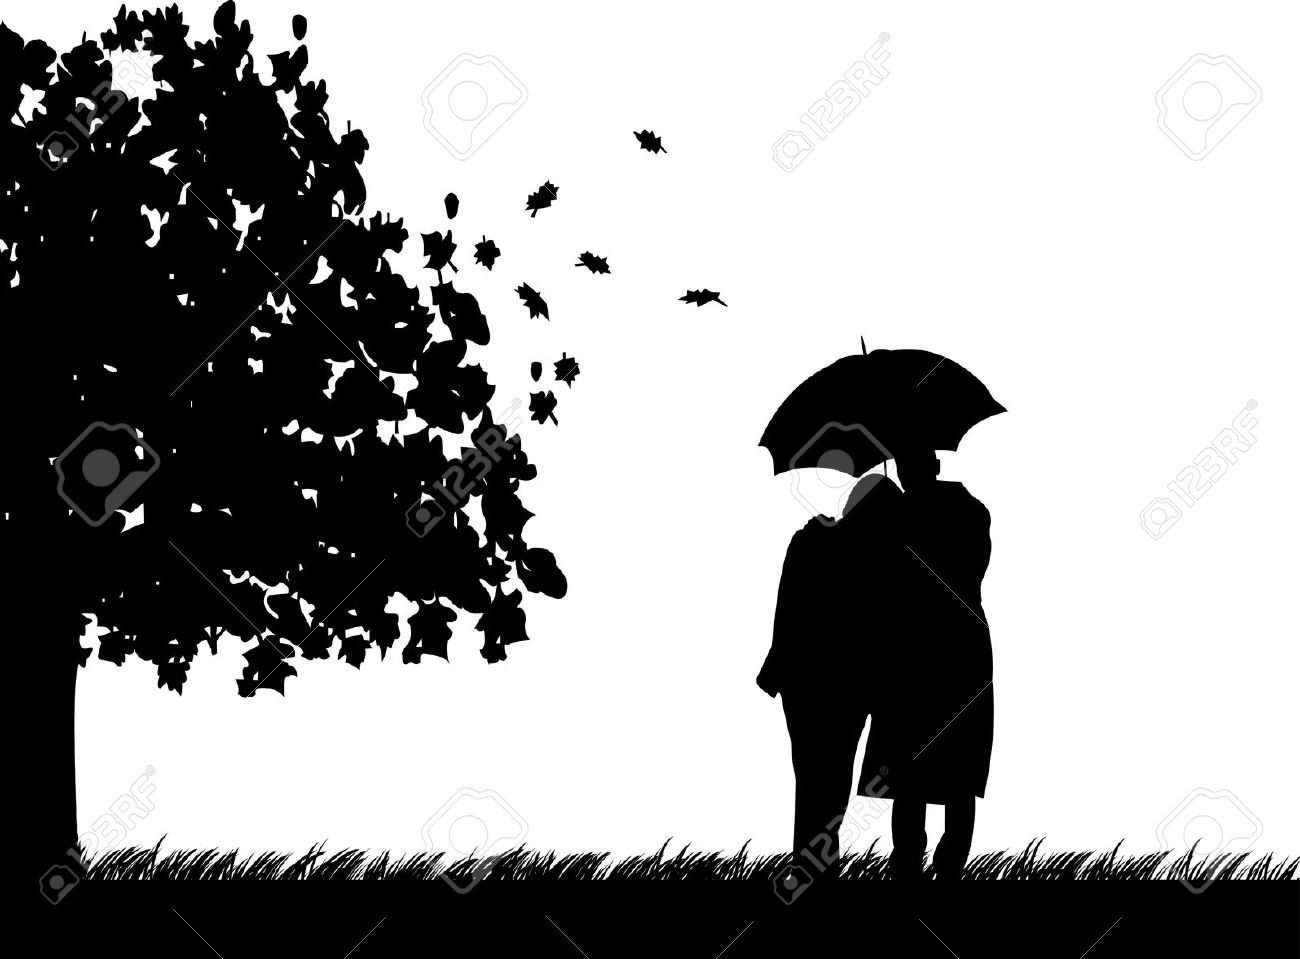 Background With Couple Walking With Umbrella Under The Tree In.